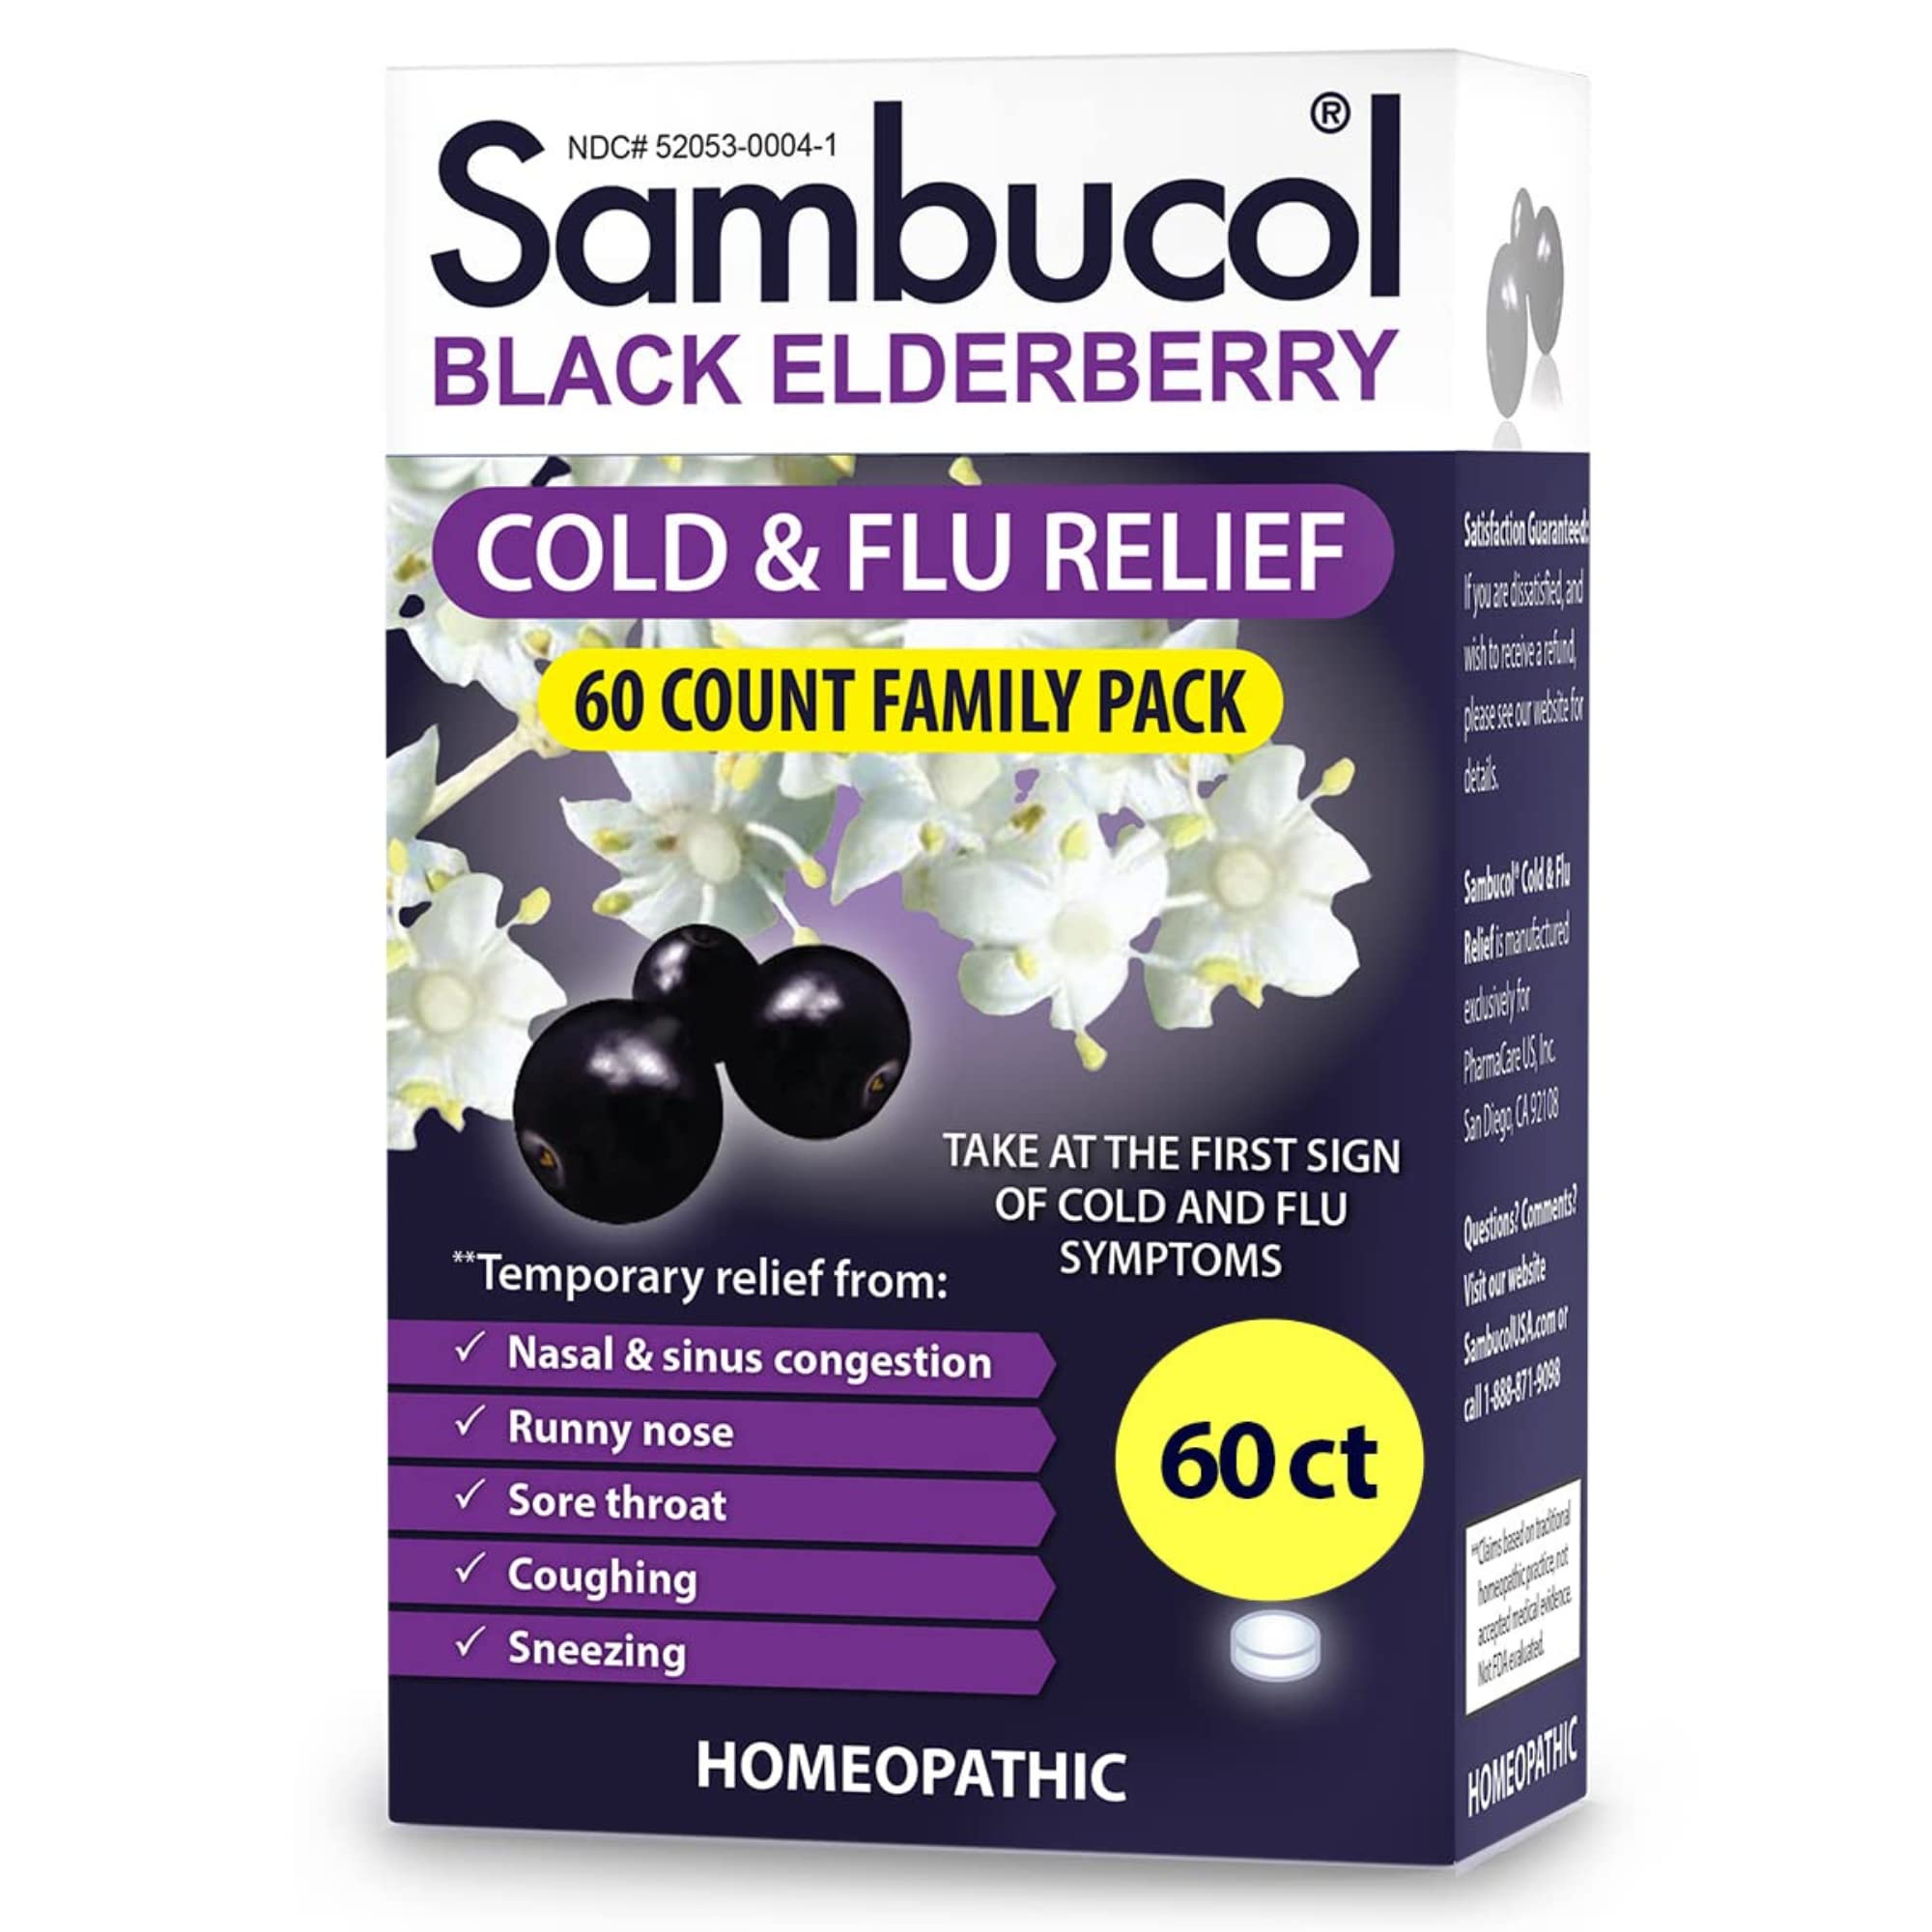 Sambucol Cold and Flu Relief Tablets - Homeopathic Cold Medicine, Nasal & Sinus Congestion Relief, Use for Runny Nose, Sore Throat, Coughing, Cold Remedy for Adults - Black Elderberry, 60 Count